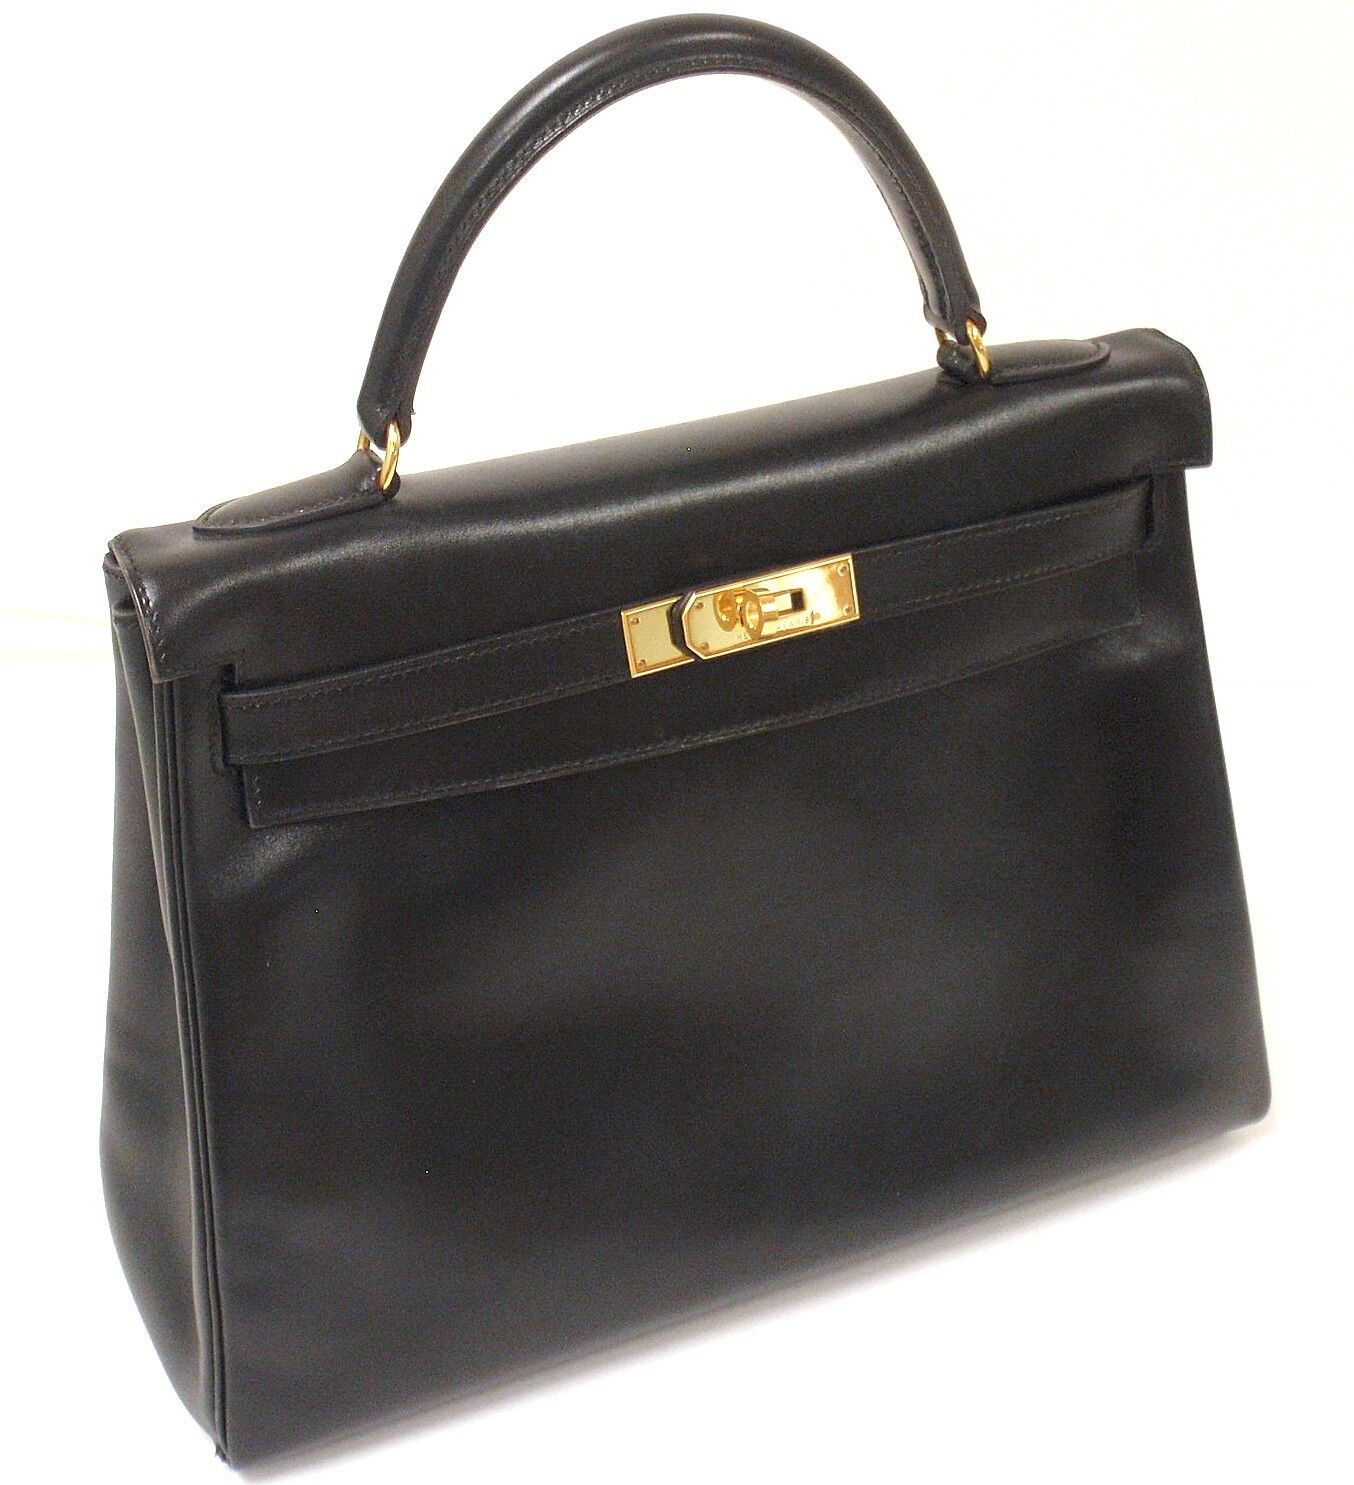 Hermes Clothing, Shoes & Accessories:Women:Women's Bags & Handbags GREAT CONDITION HERMES 32CM BLACK BOX LEATHER SHOULDER KELLY HANDBAG, YEAR 1998